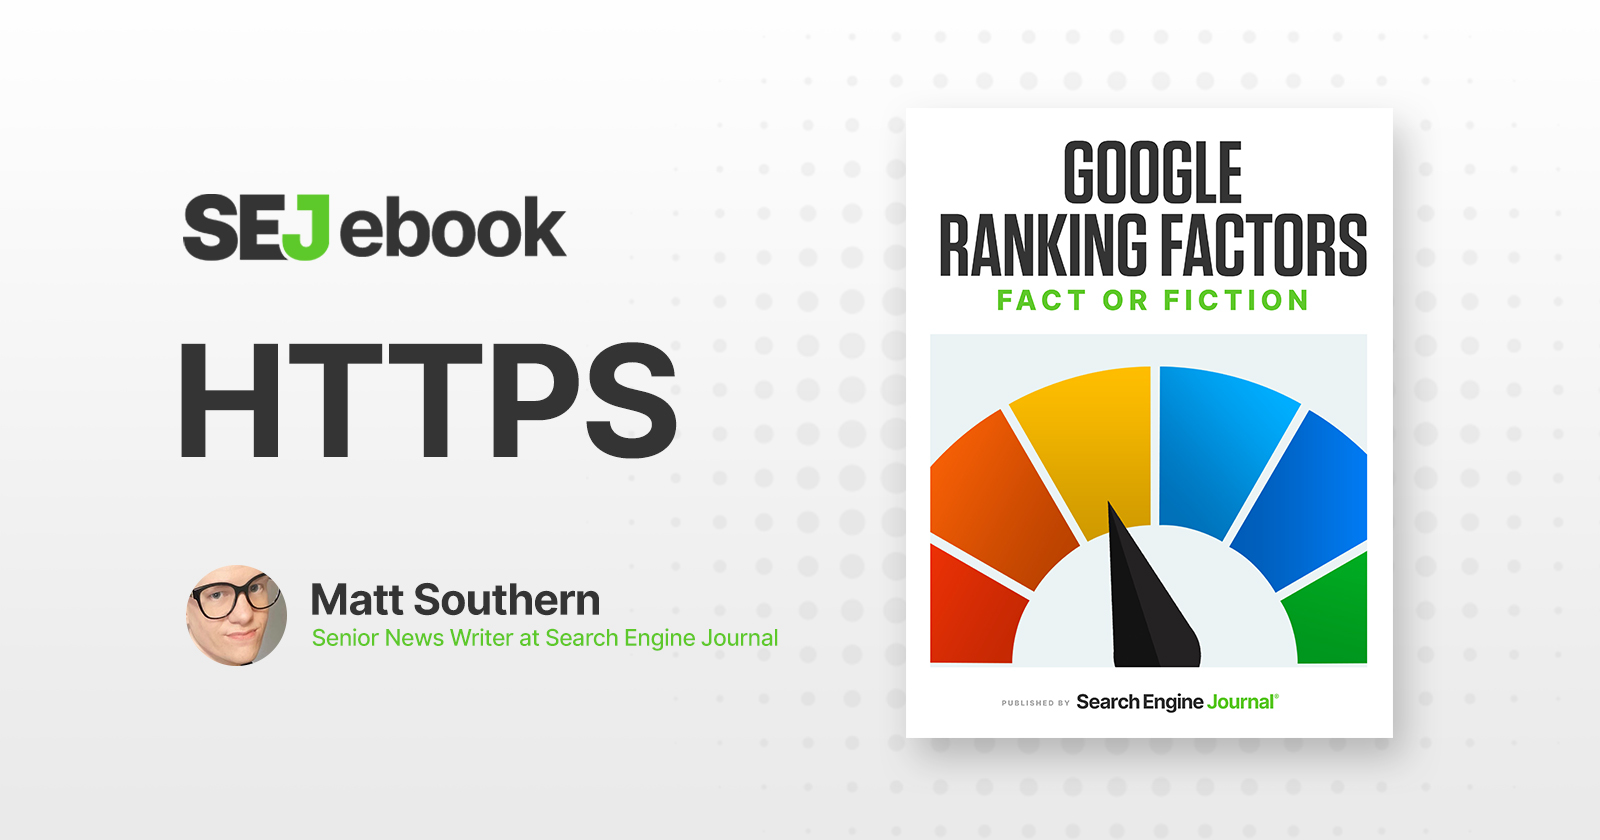 HTTPS As A Google Ranking Factor: What You Need to Know